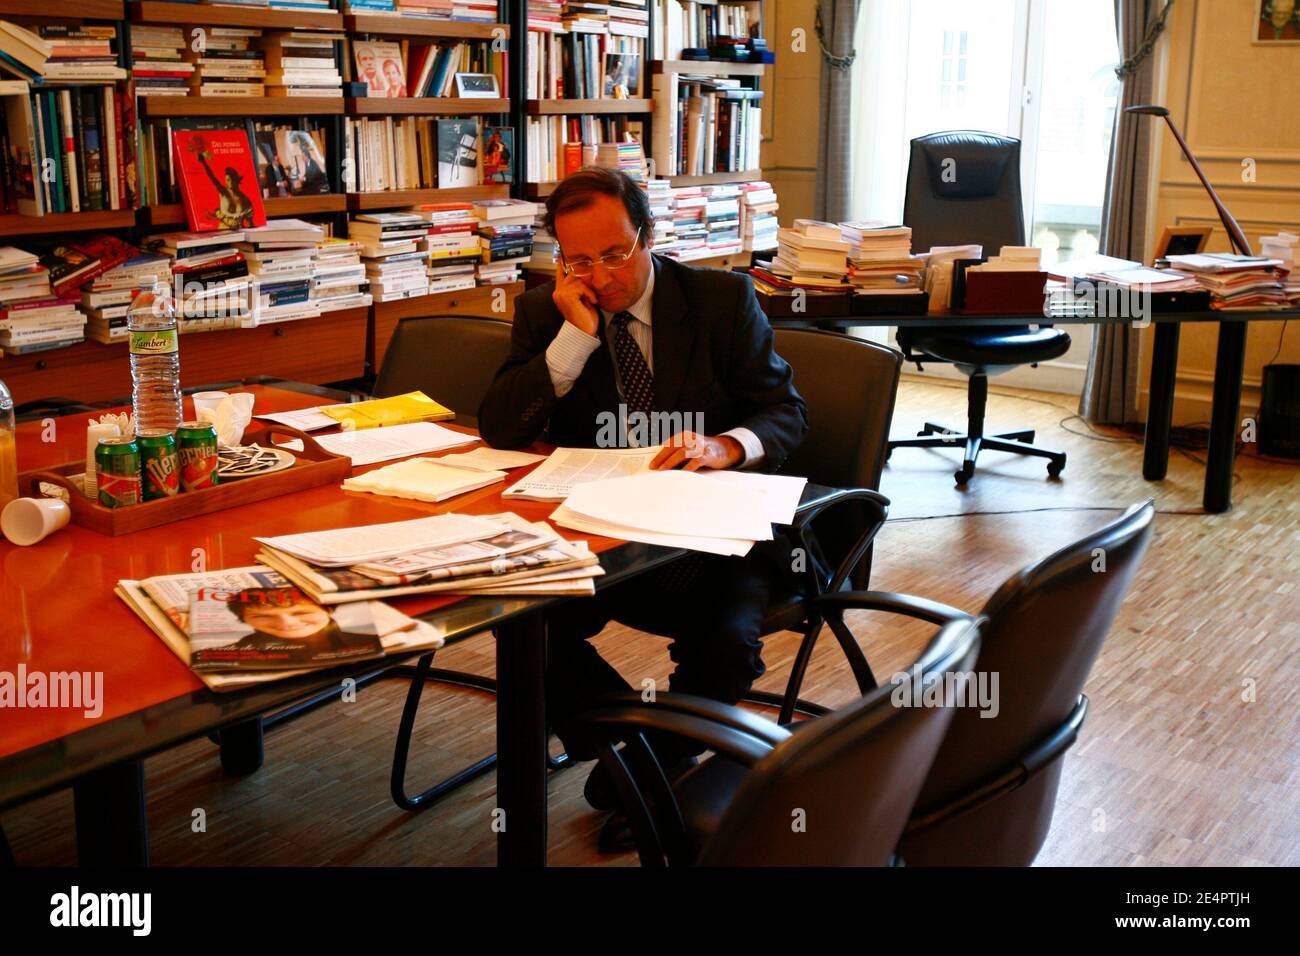 French Socialist party leader Francois Hollande in his office at the  Socialist Party's headquarters, rue de Solferino, in Paris, France, on  January 14, 2008. Photo by Elodie Gregoire/ABACAPRESS.COM Stock Photo -  Alamy